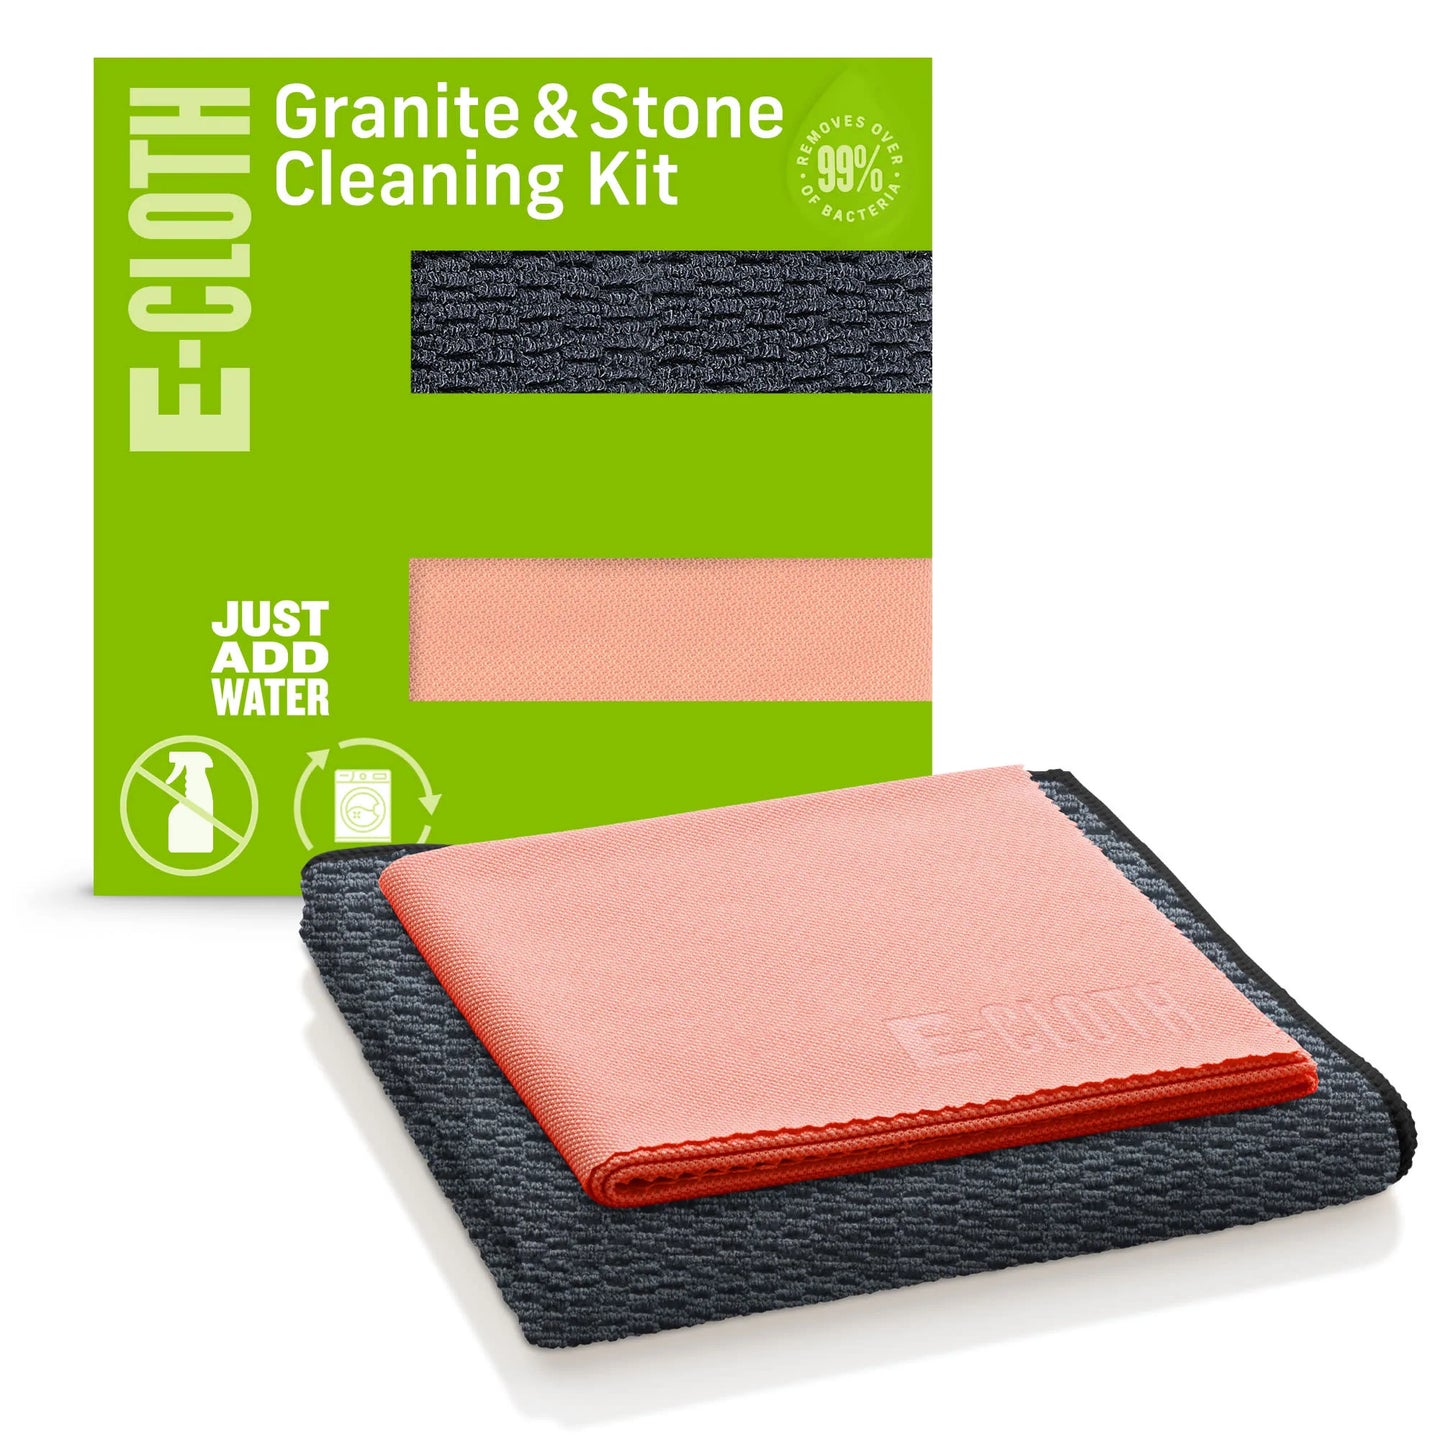 eCloth - Granite & Stone Cleaning Kit